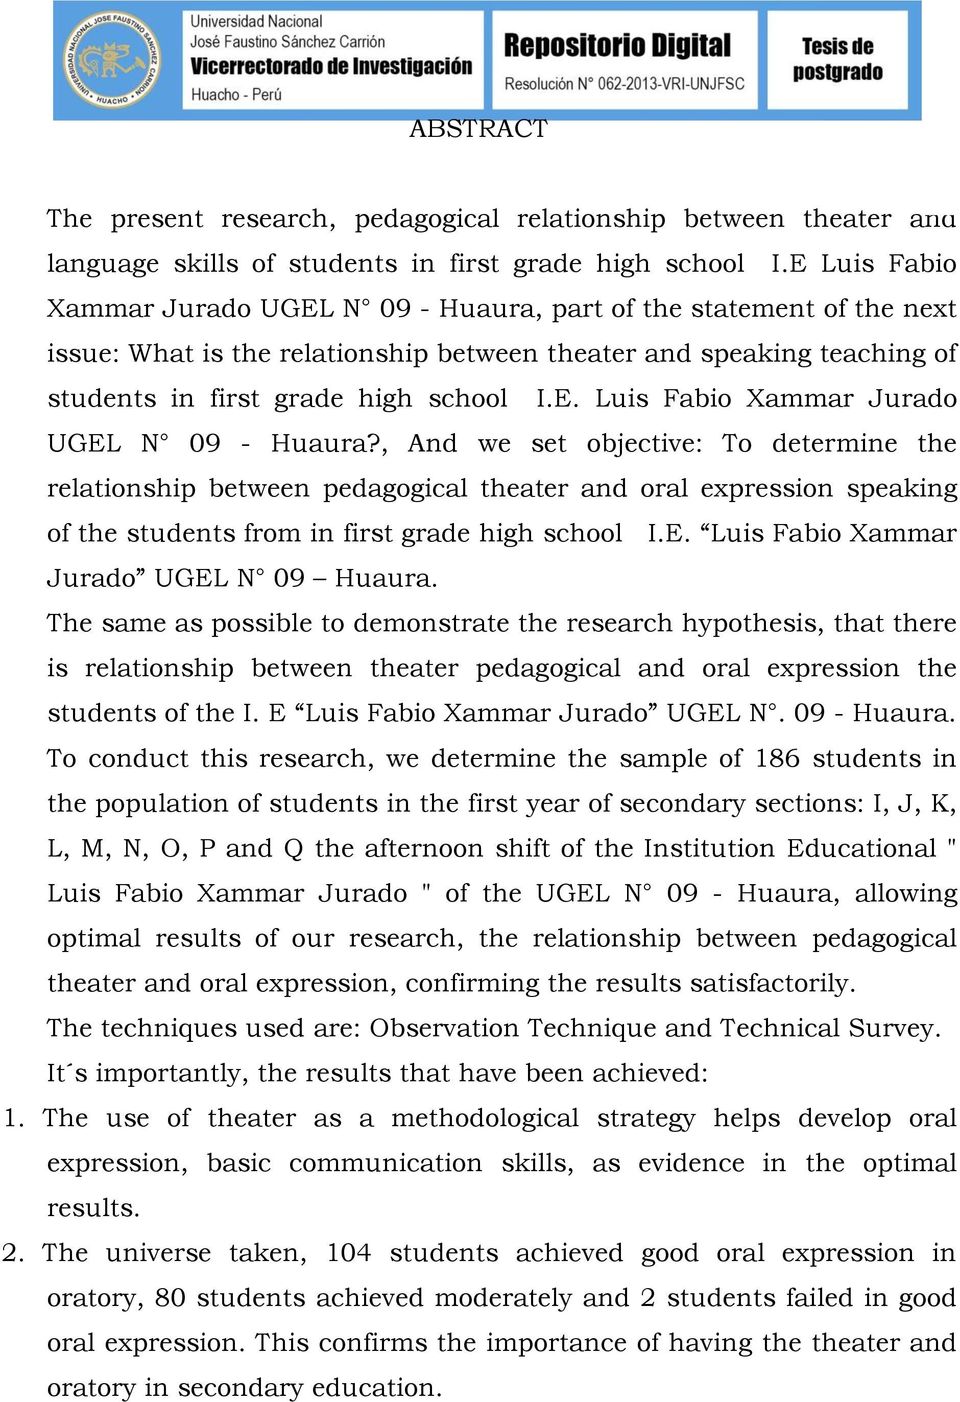 part of the statement of the next issue: What is the relationship between theater and speaking teaching of students in first grade high school I.E. Luis Fabio Xammar Jurado UGEL N 09 - Huaura?